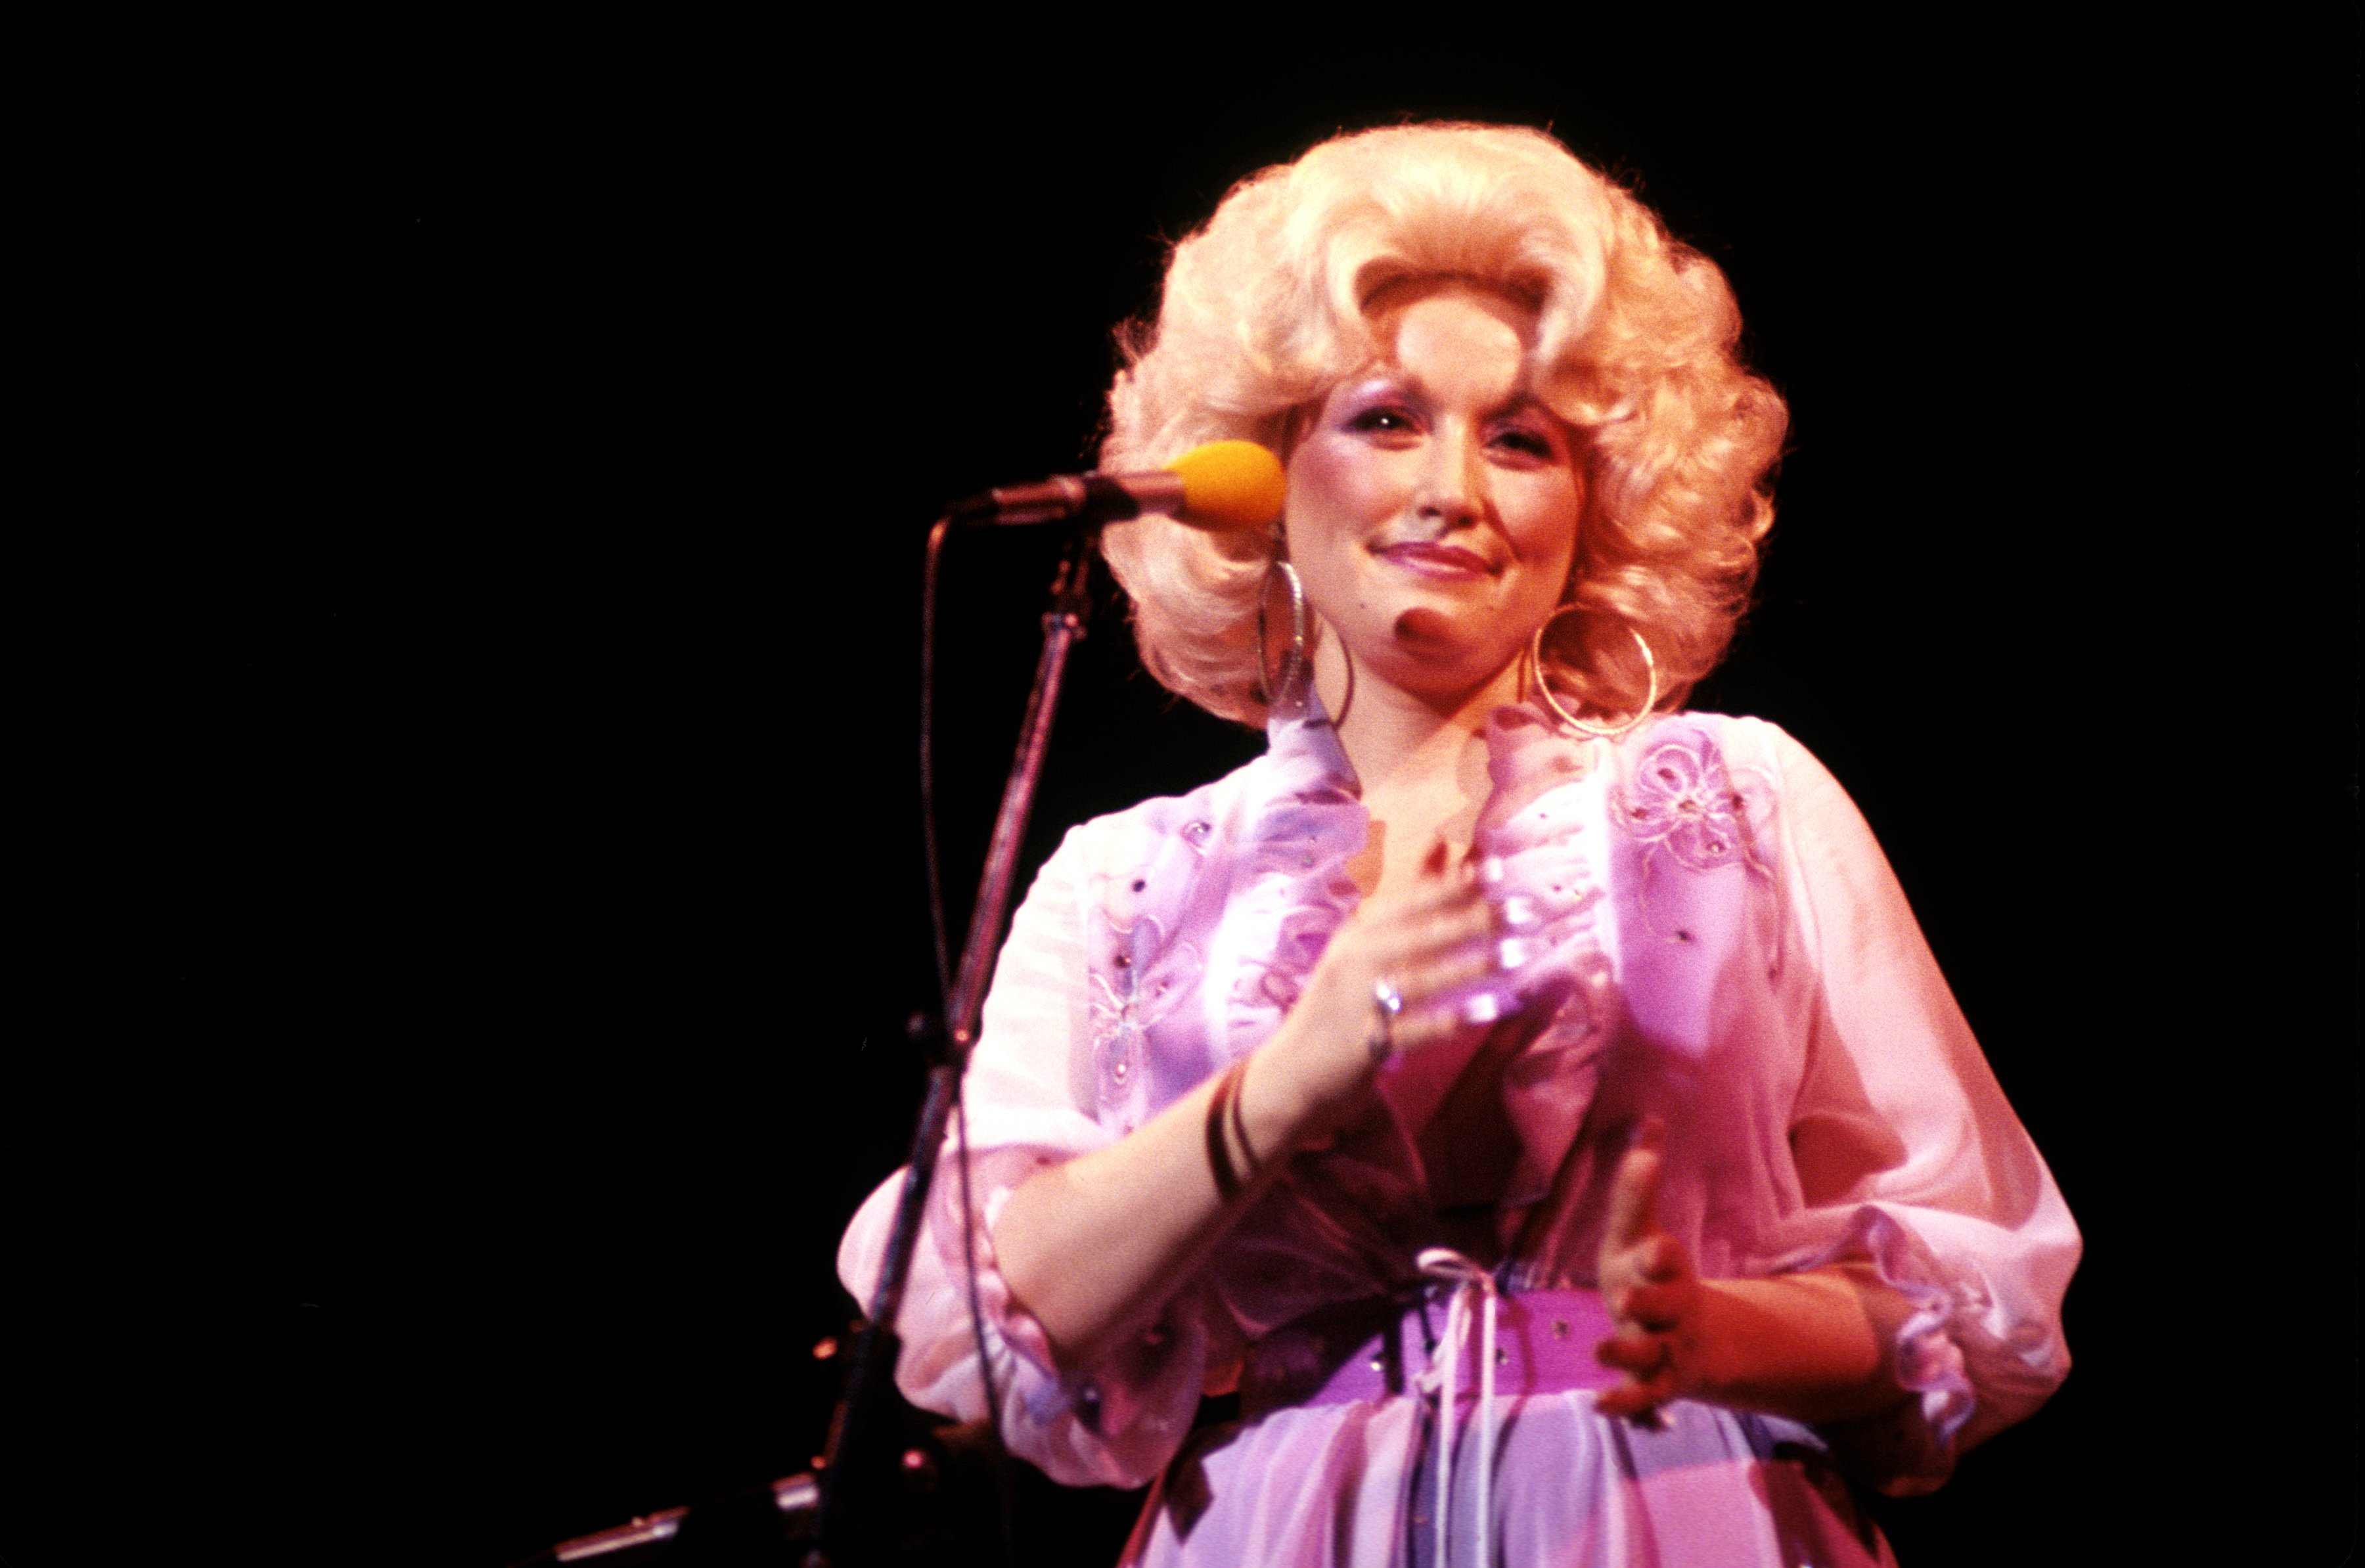 Dolly Parton on stage, speaking into a microphone.